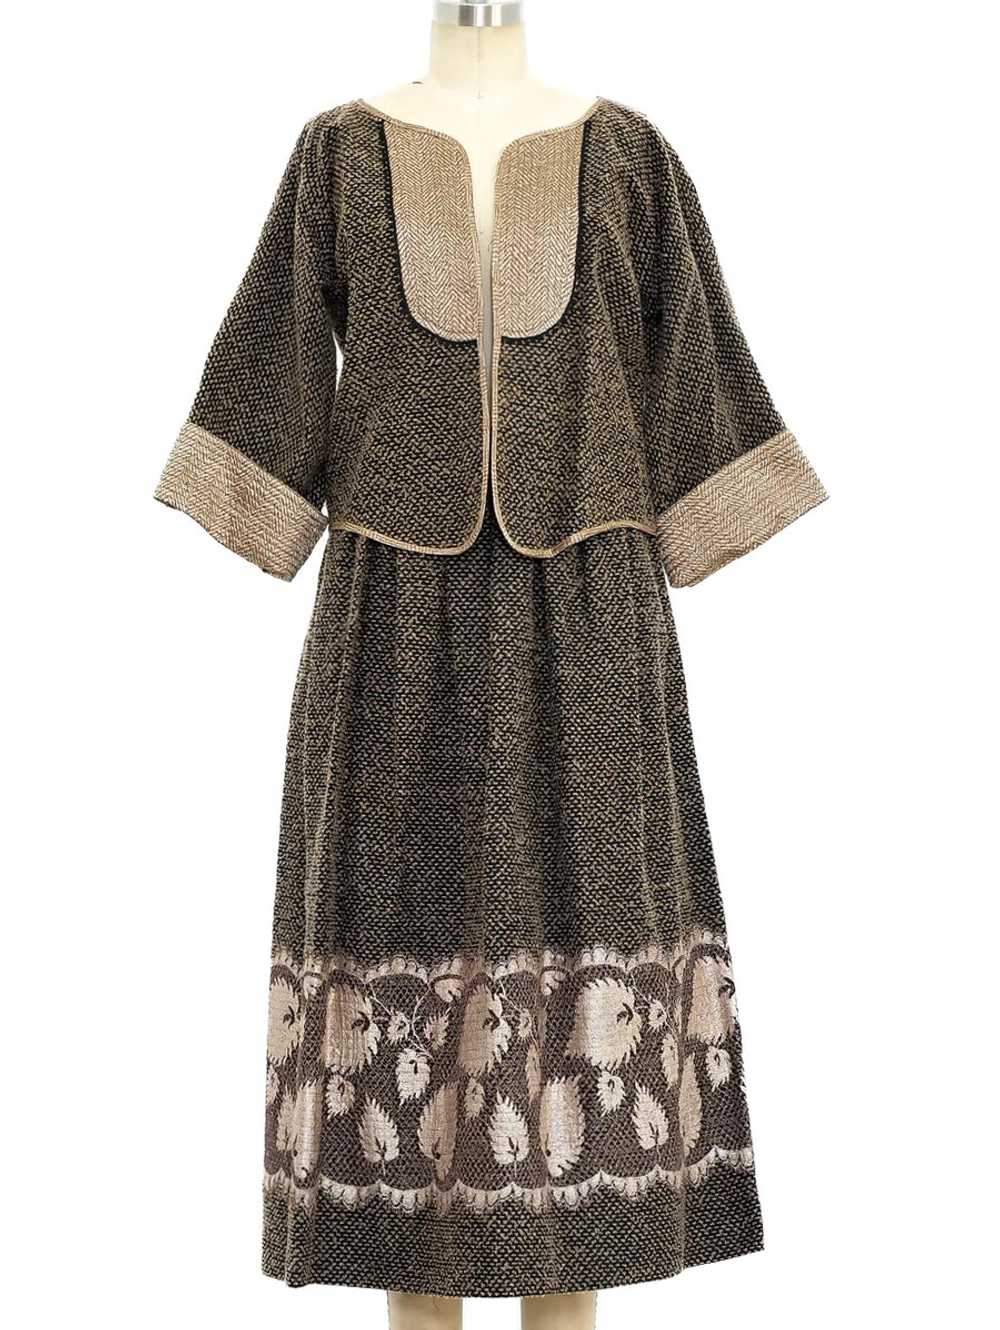 Geoffrey Beene Tweed and Lace Skirt Ensemble - image 1